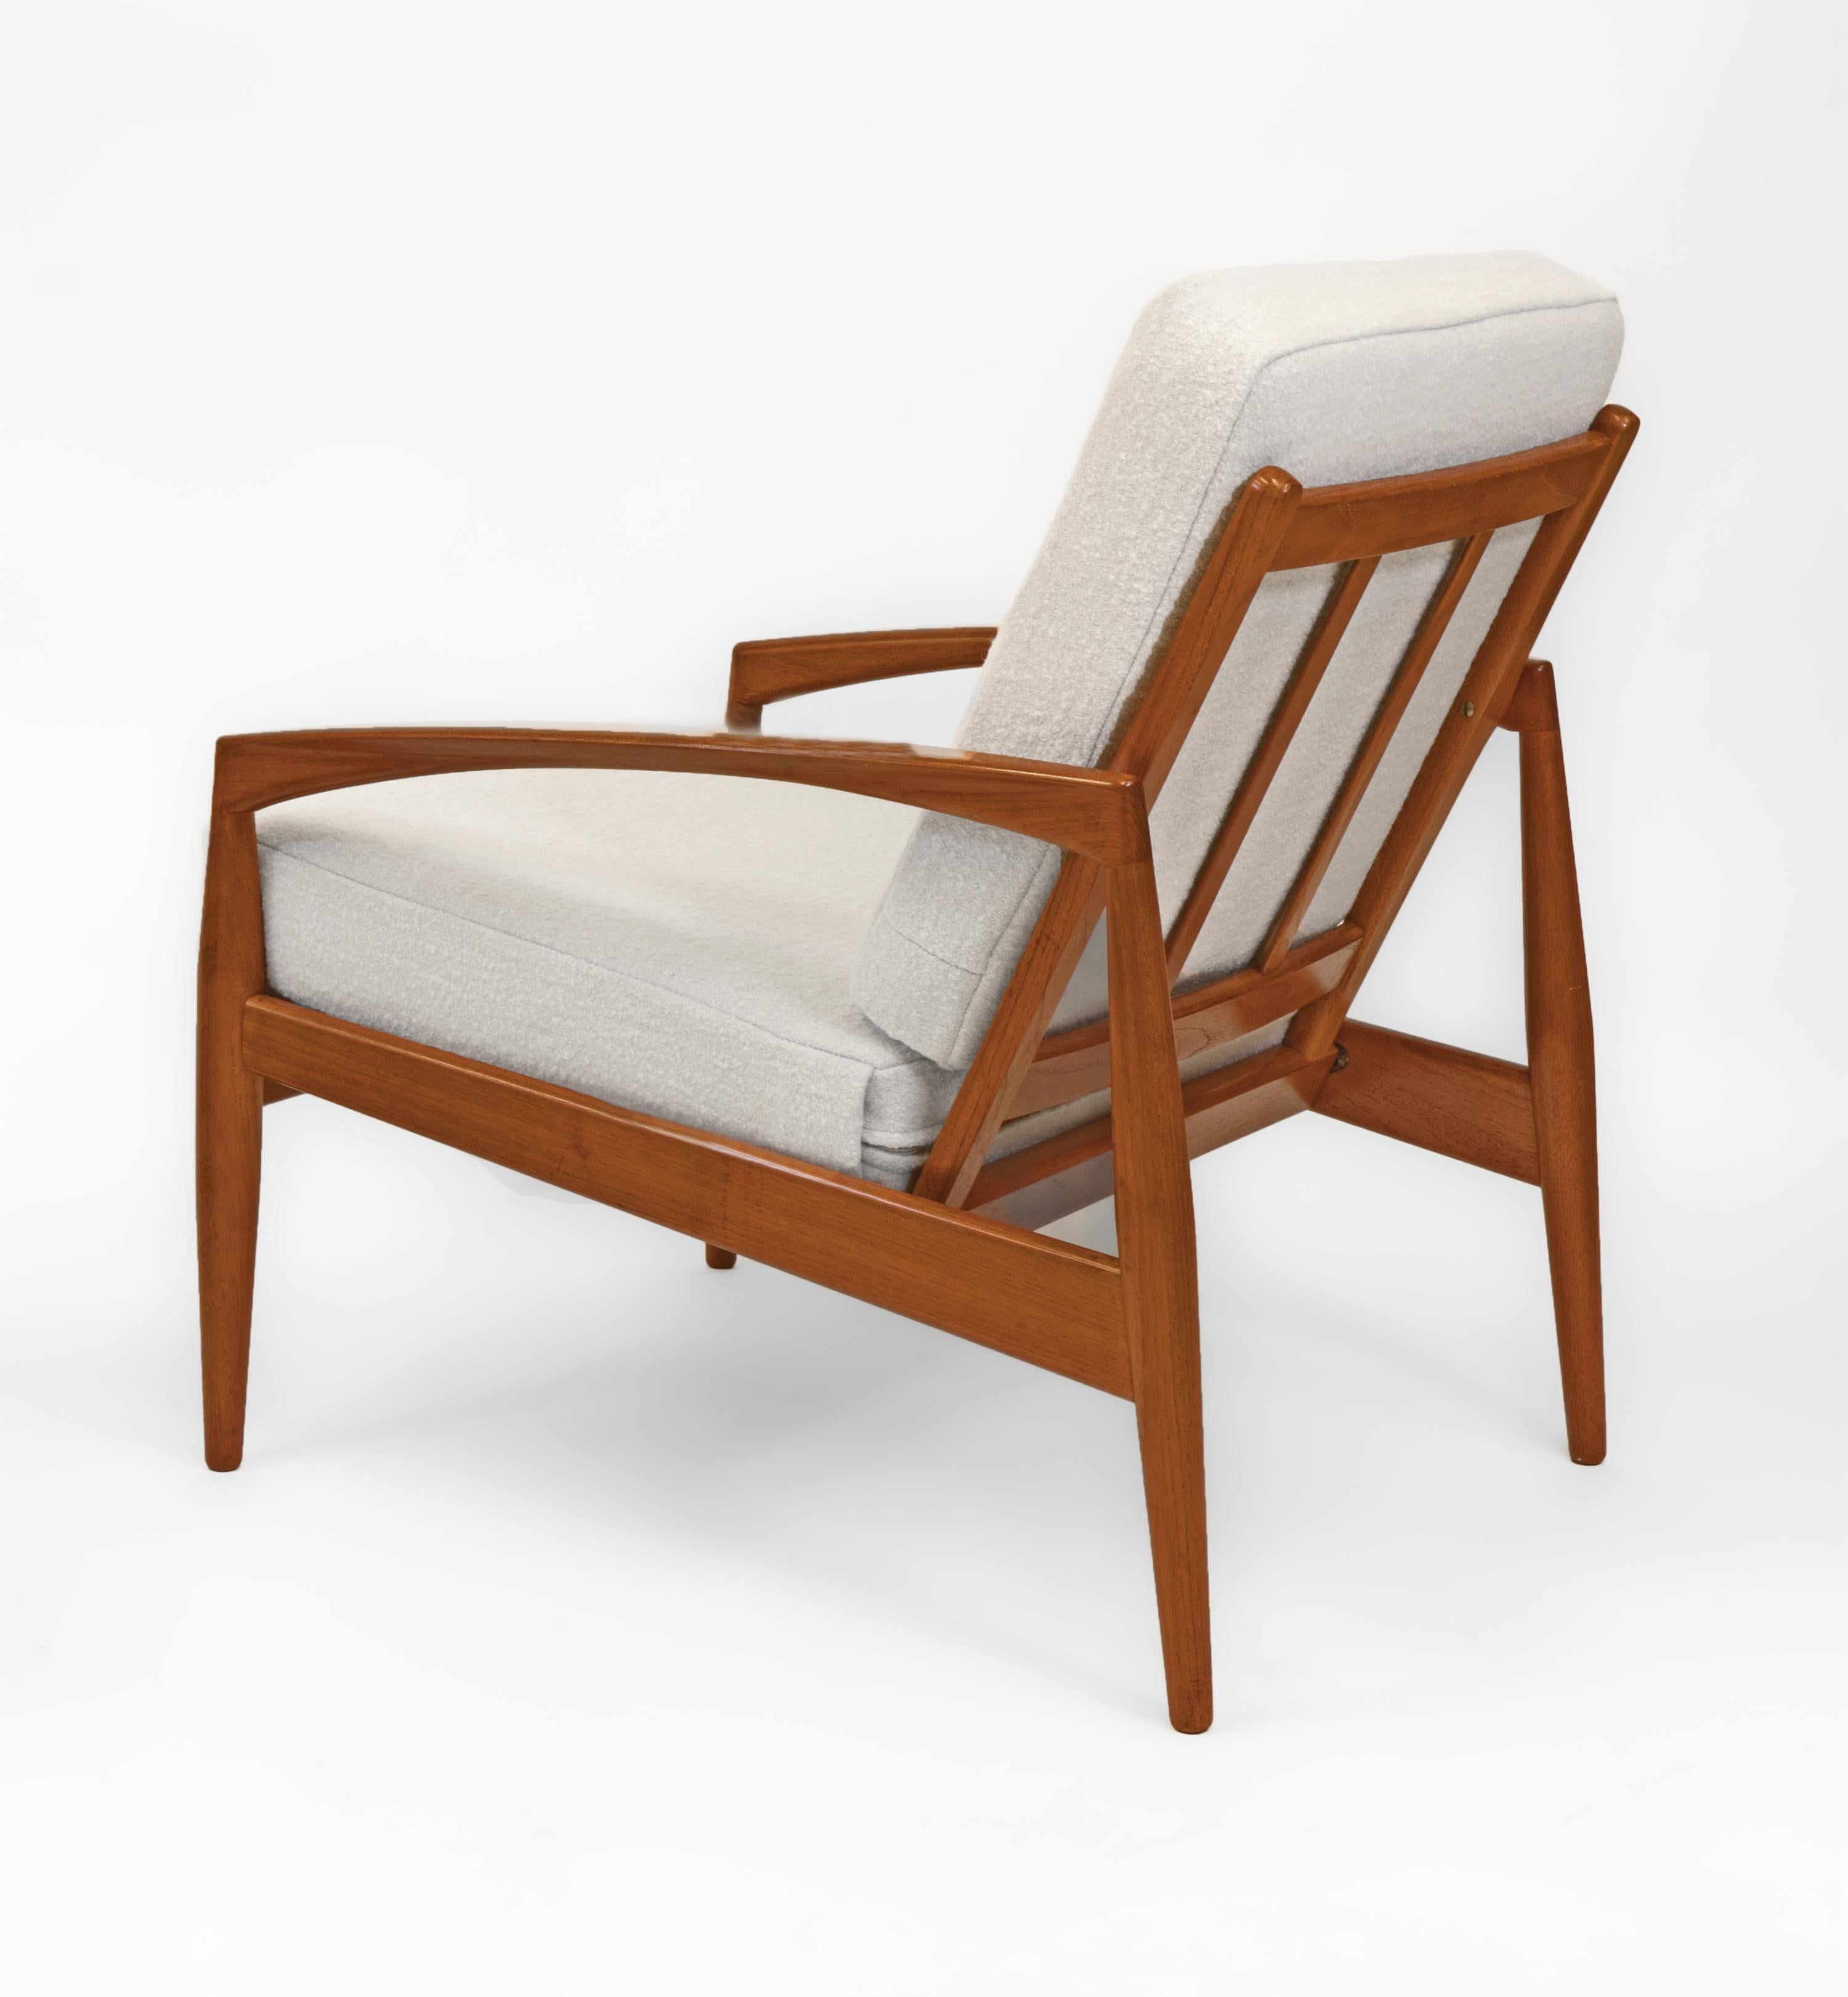 Superb pair of Danish mid century teak ‘Paper Knife’ lounge chairs designed by Kai Kristiansen for Magnus Olesen. Model 121. Maker's labels. Circa 1960.

The chairs have solid teak sleek and sculptured frames with their original finish. There are a